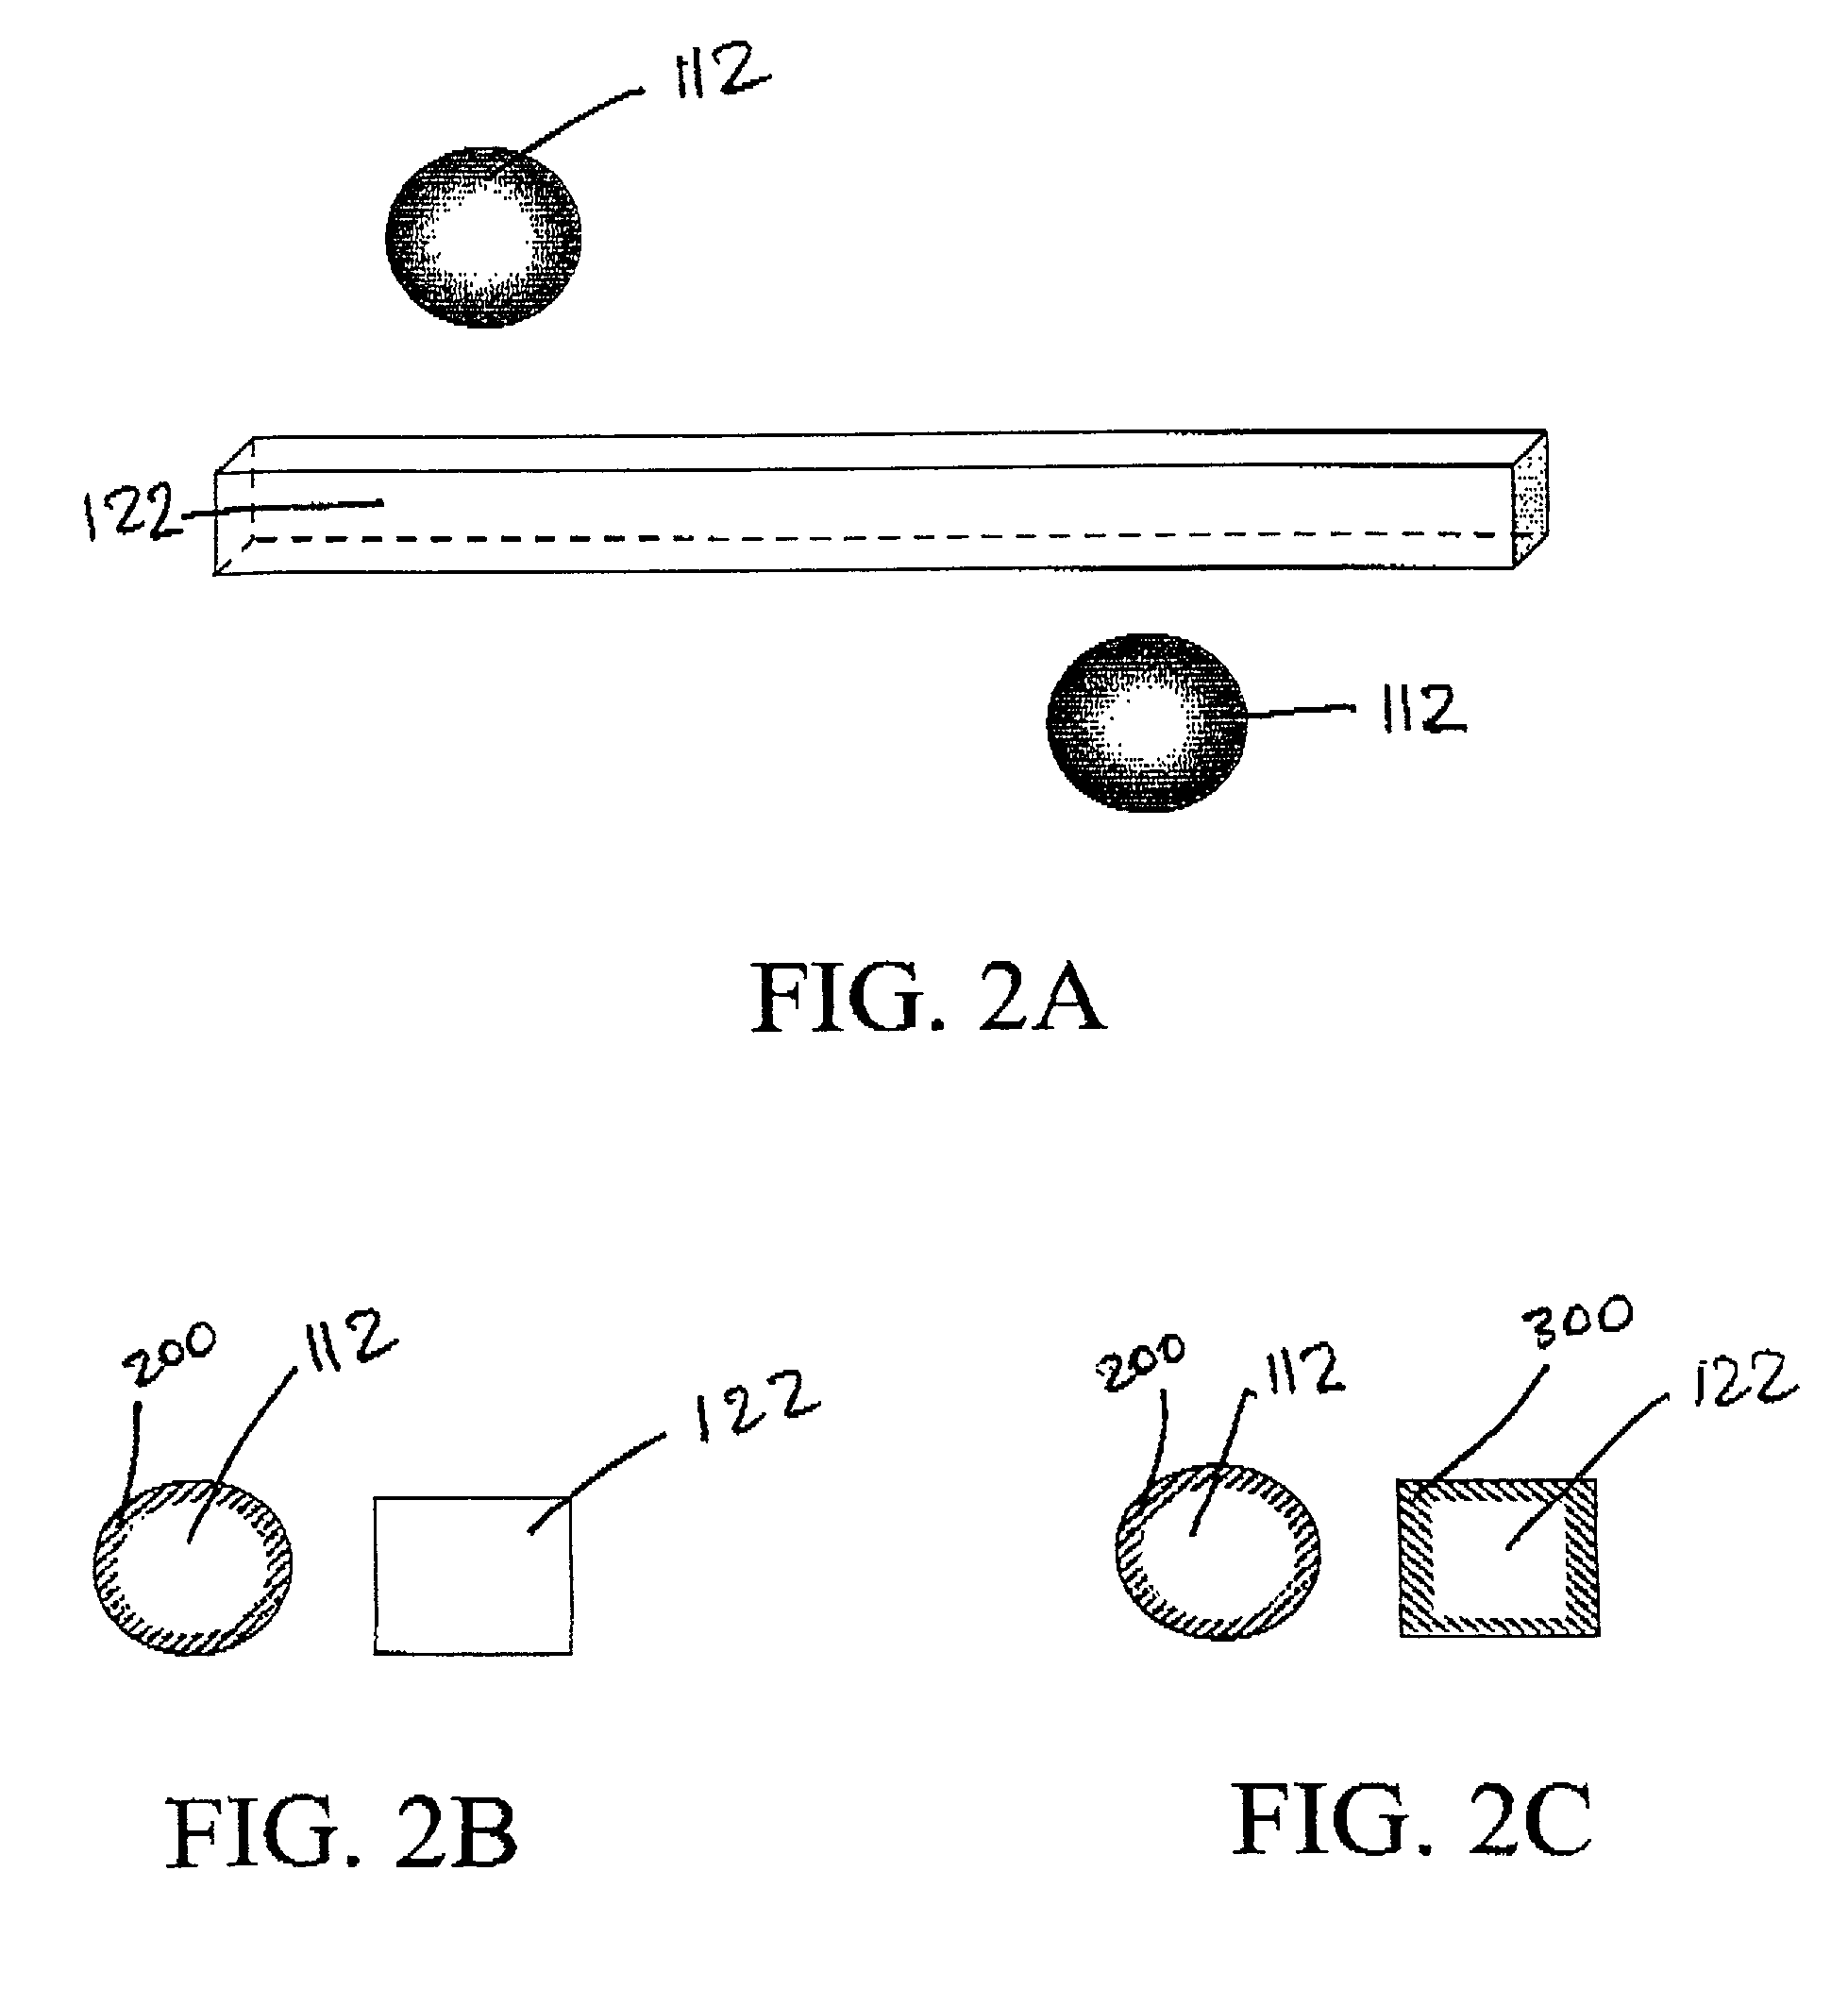 Device for maintaining vascularization near an implant